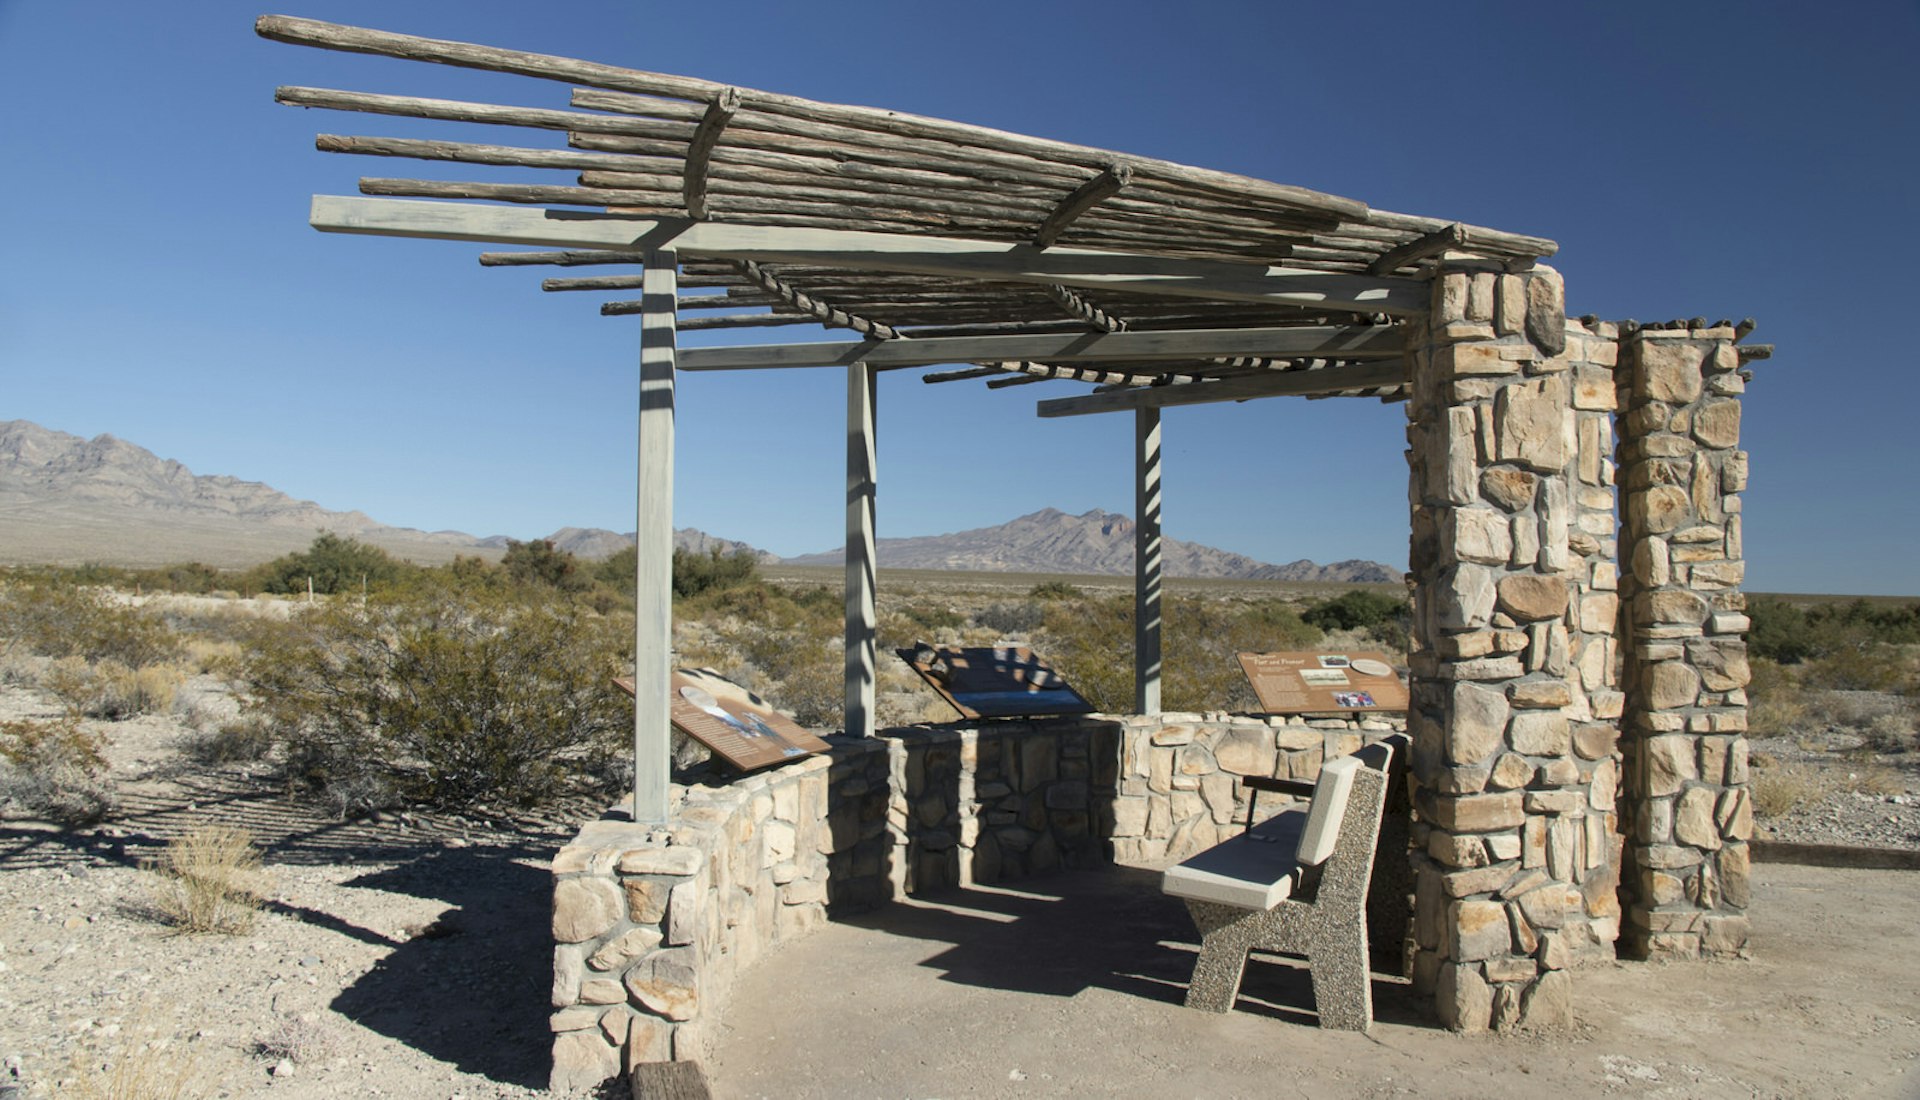 An expansive vista of scrubland and desert stretches behind a very ramshackle information gazebo made of stone and reclaimed wood © Greg Thilmont / Lonely Planet